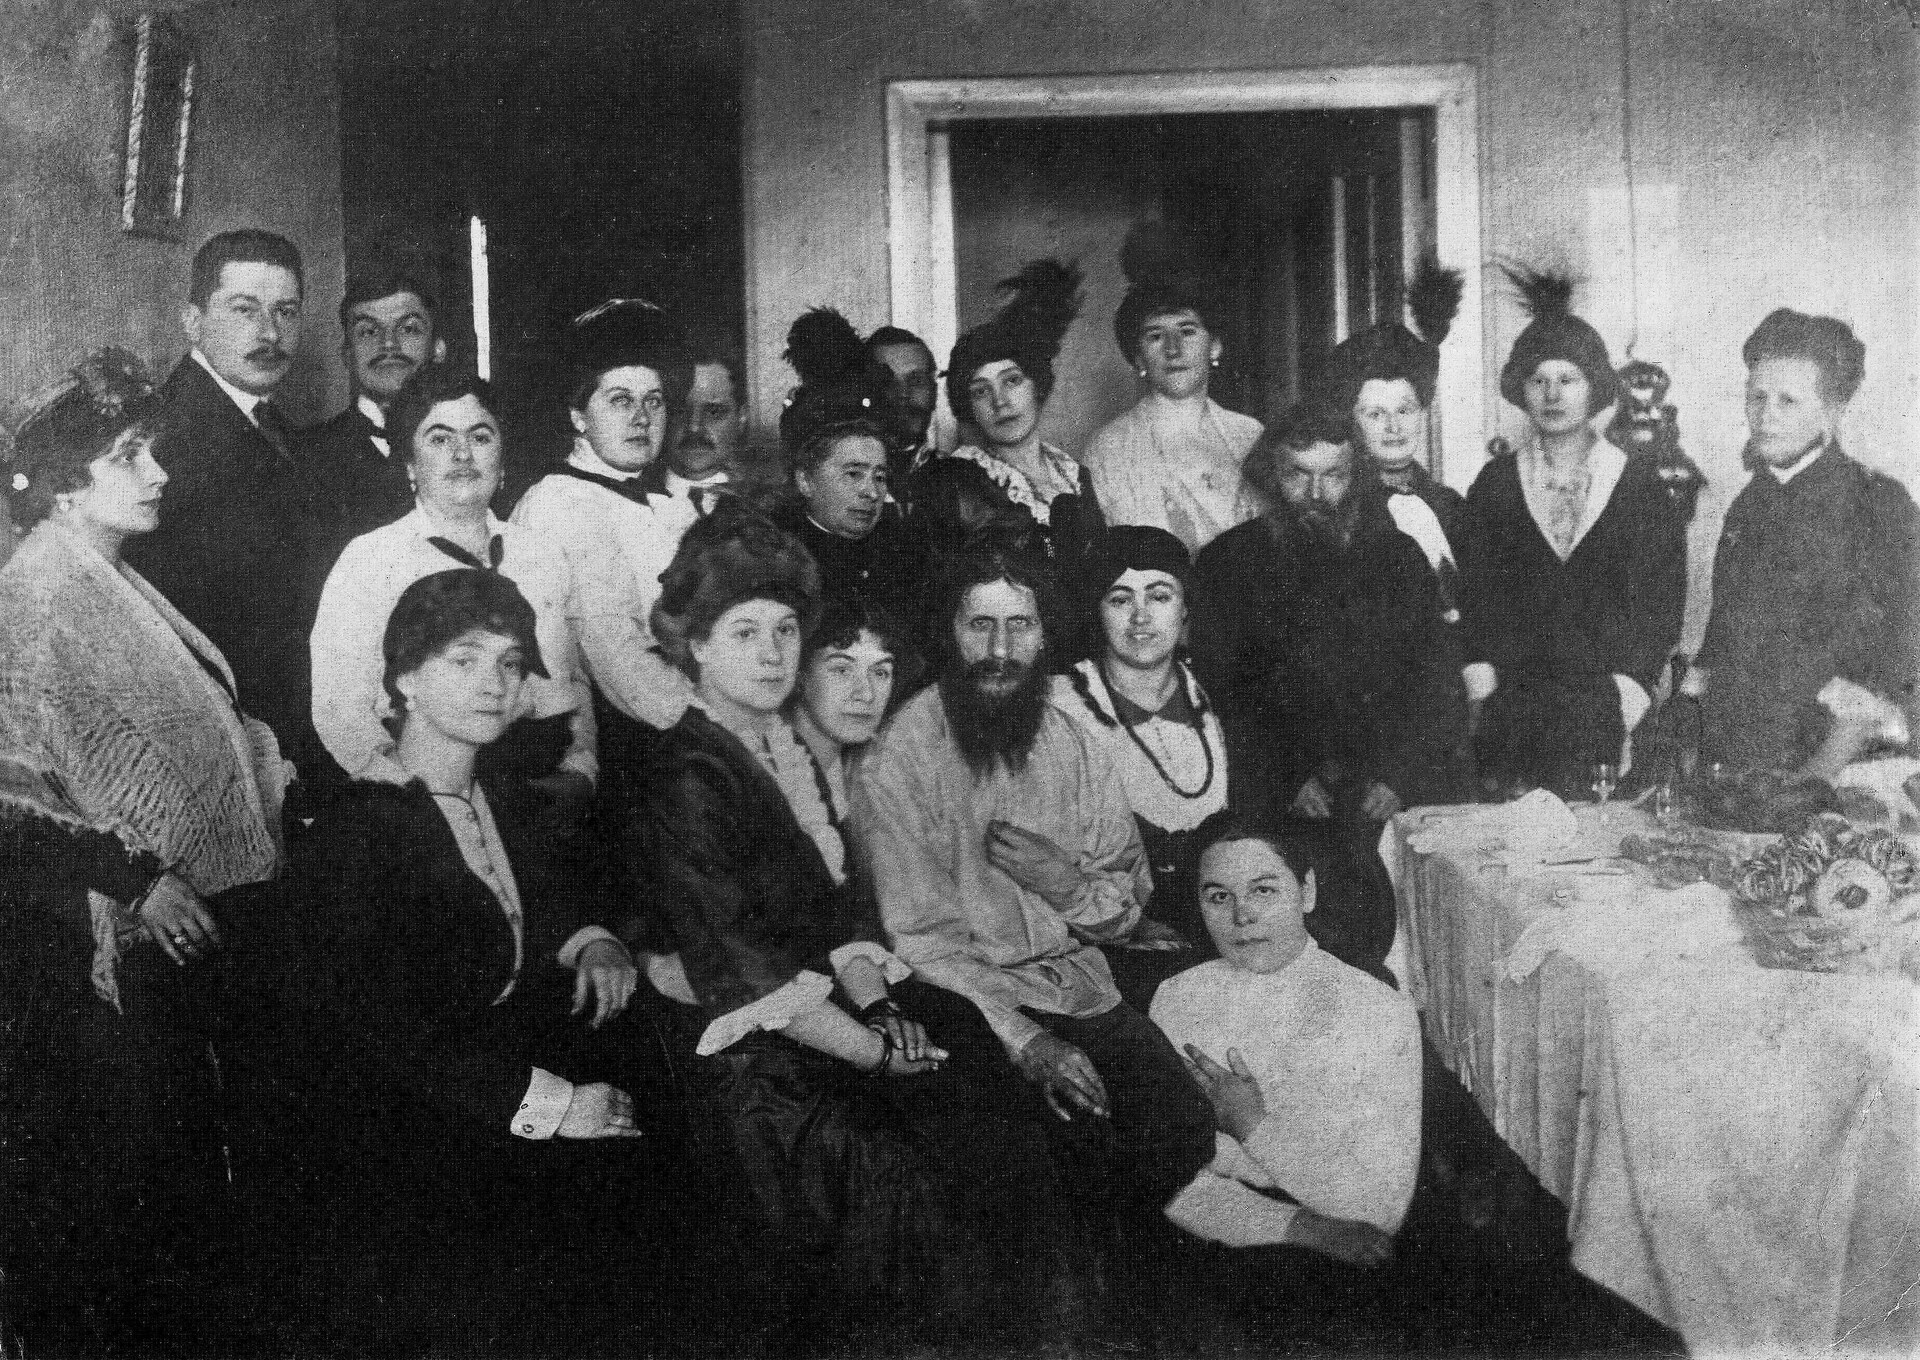 Grigory Rasputin at his home in St. Petersburg, surrounded by his admirers.